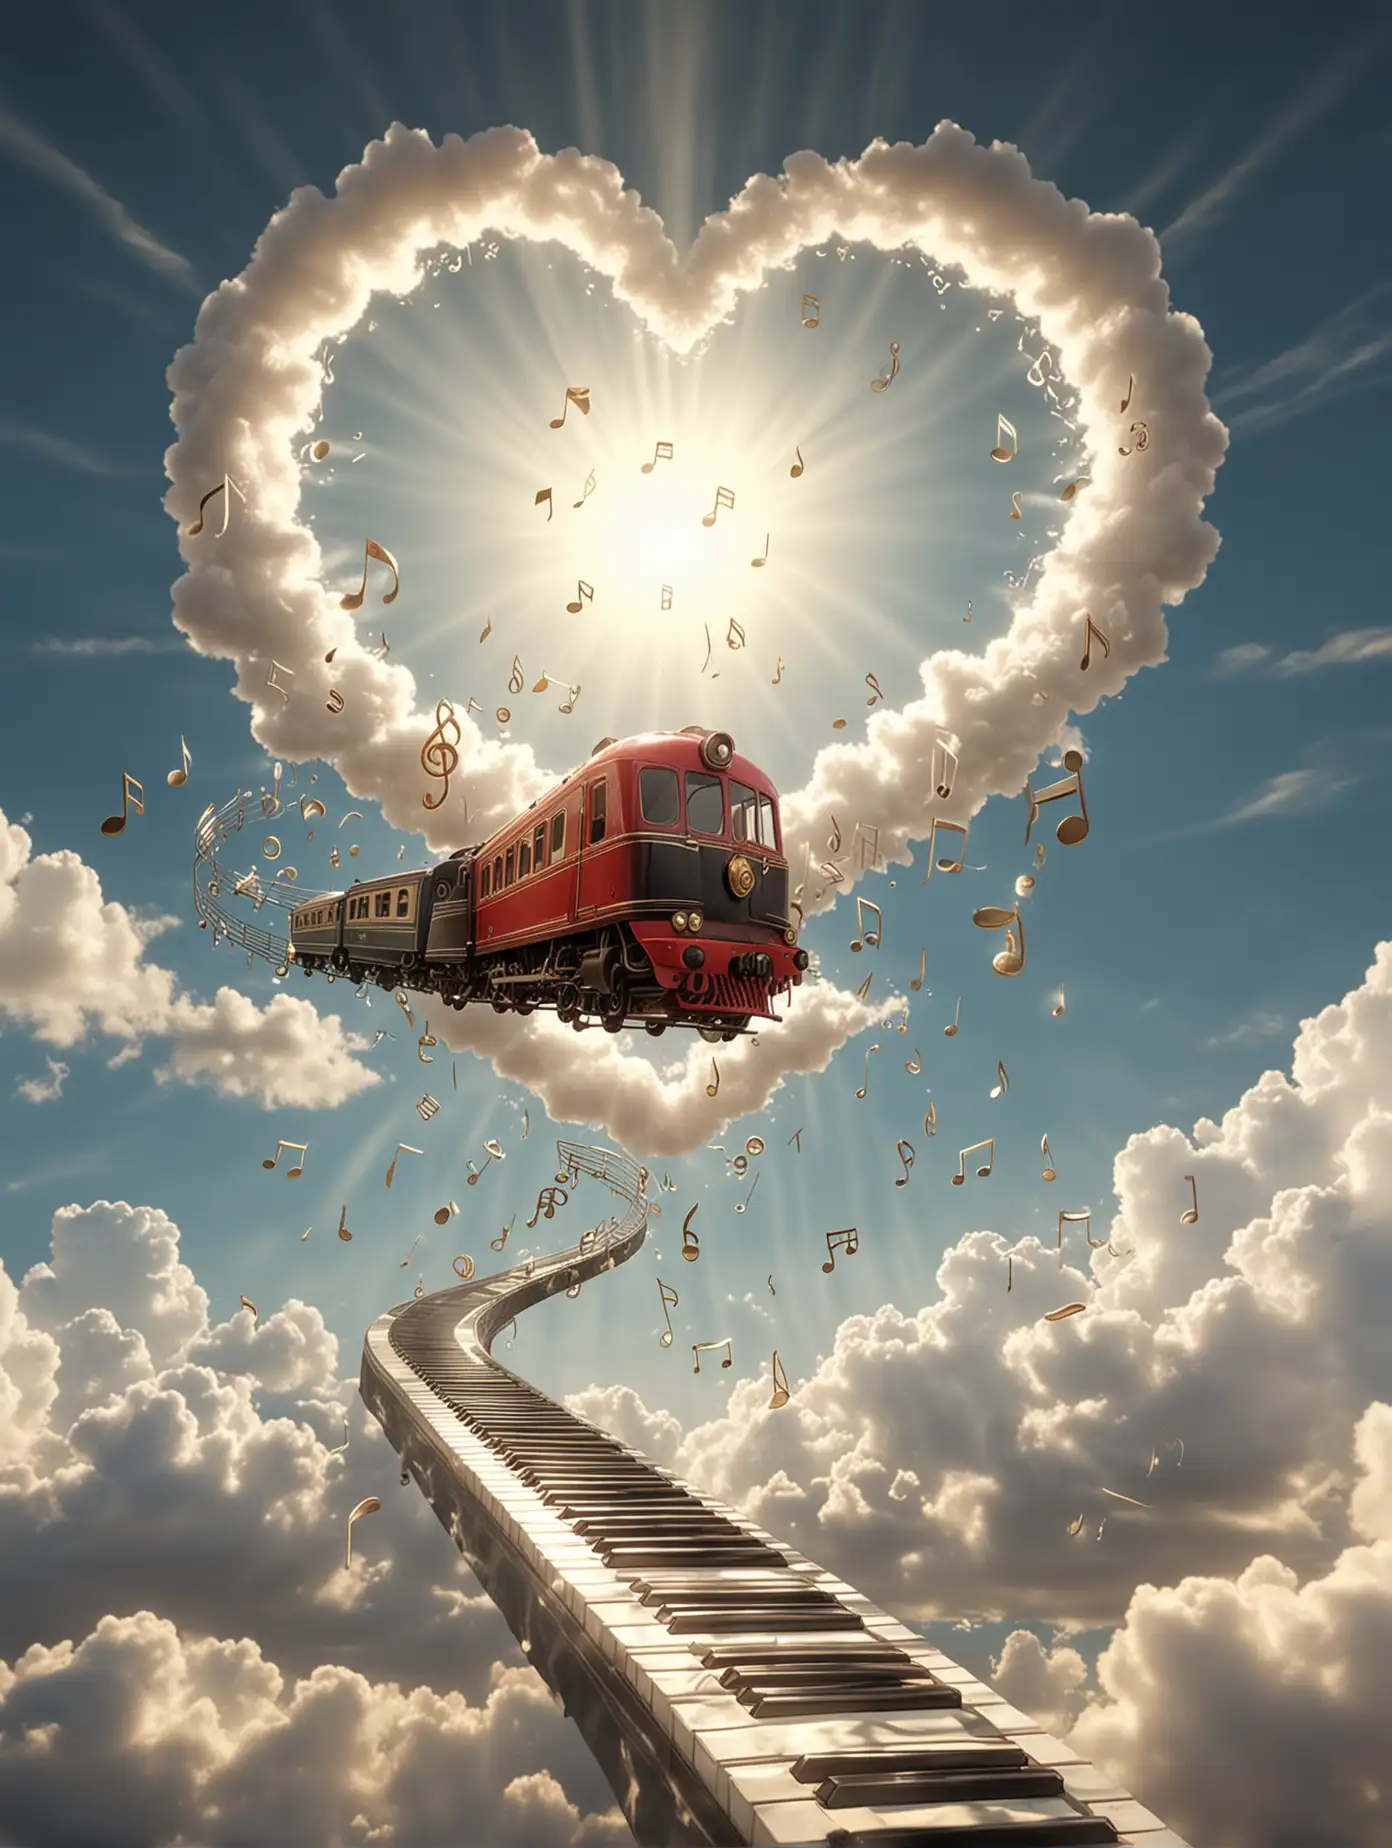 HeartShaped Train with Musical Notes in Clouds